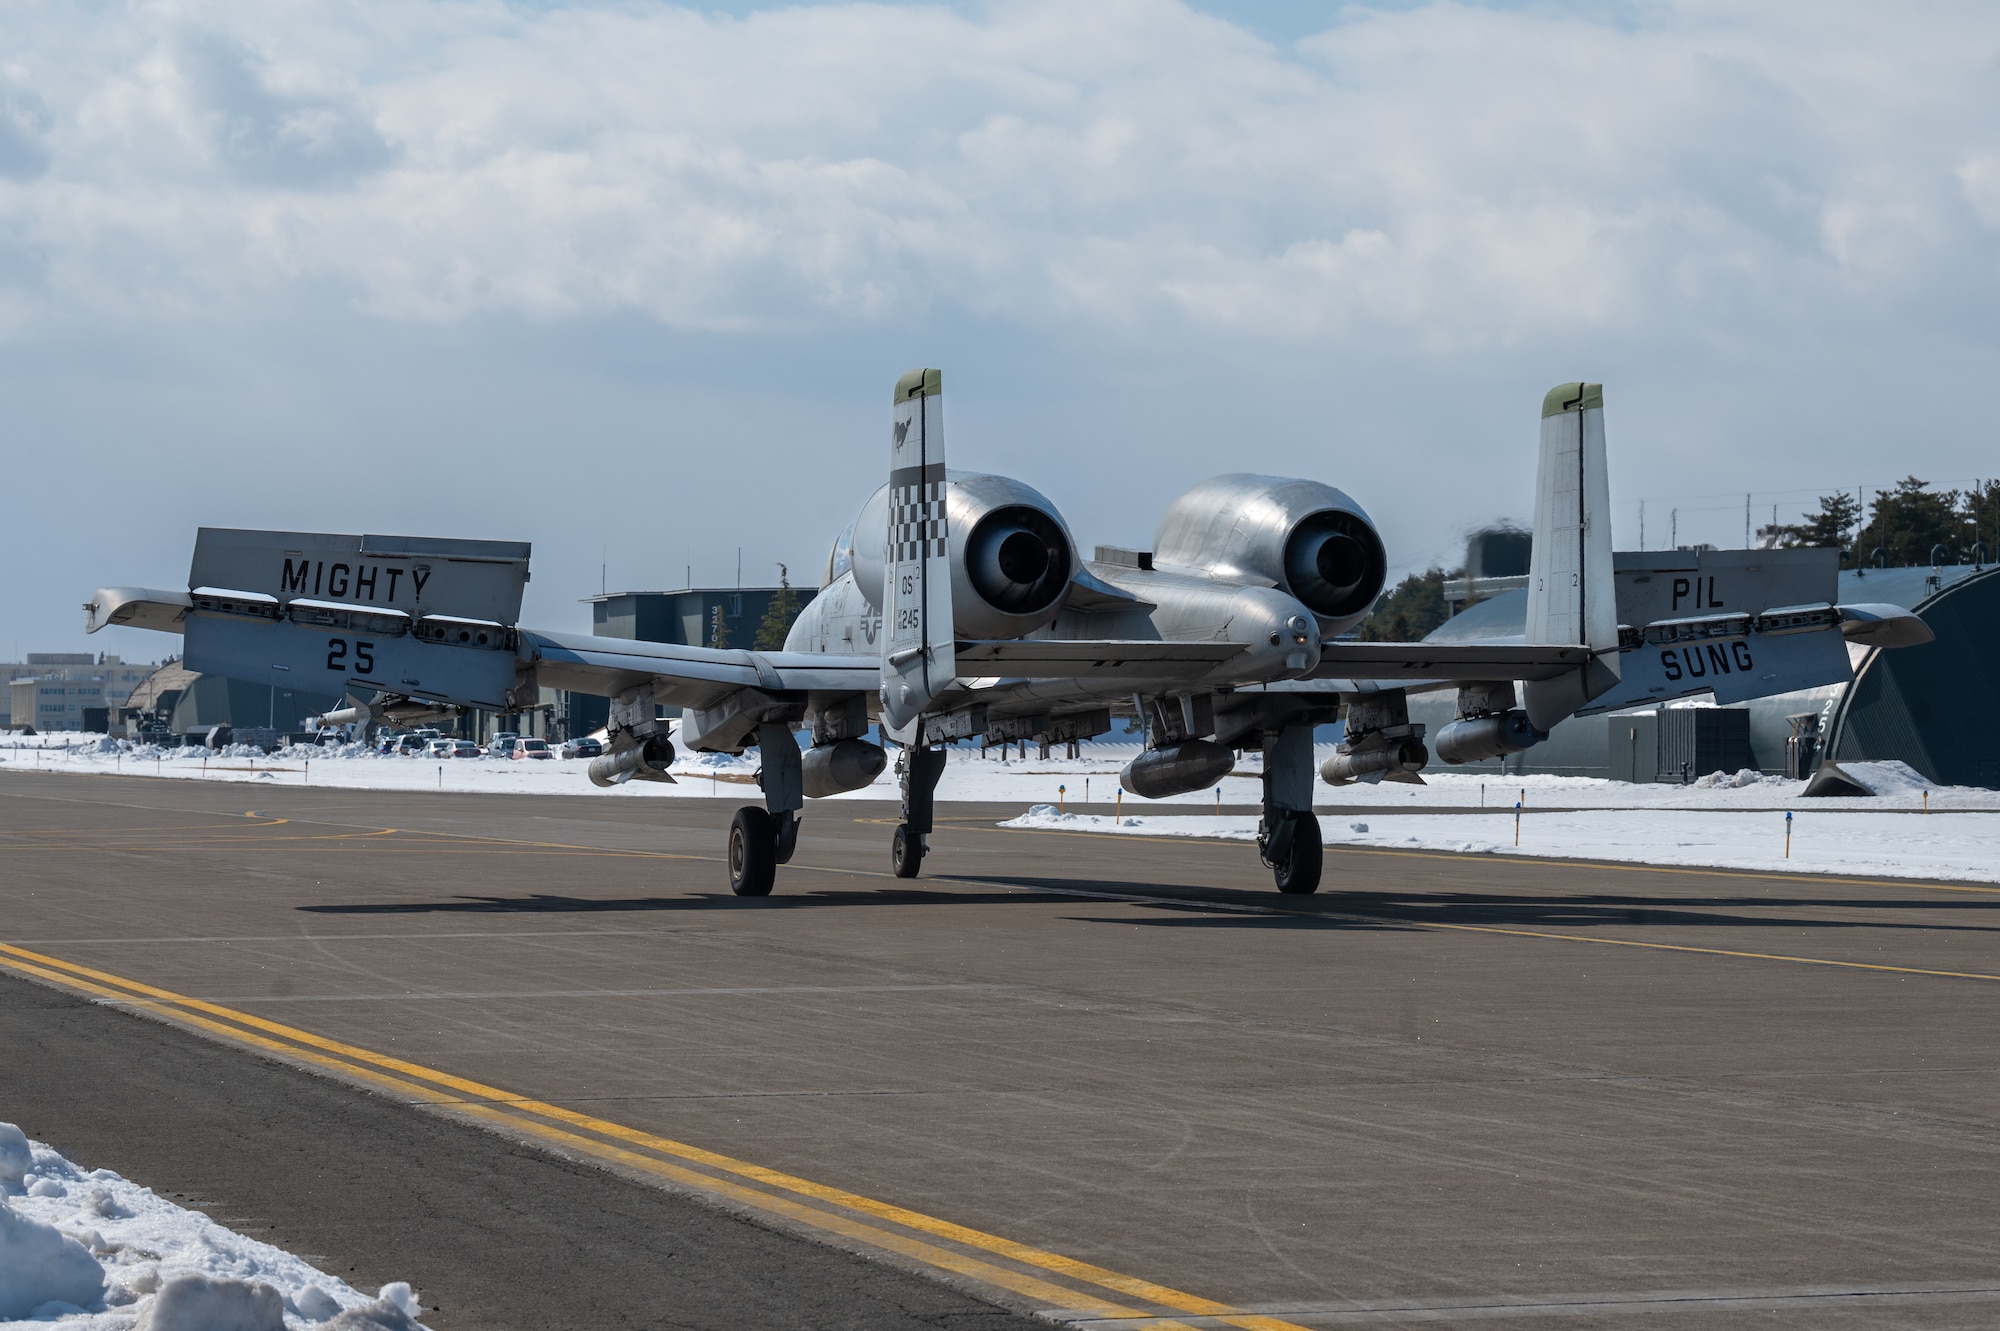 U.S. Air Force Capt. Jacob Stafford, 25th Fighter Squadron A-10C Thunderbolt II pilot, taxis a runway during the Ninja Mustang training event at Misawa Air Base, Japan, March 7, 2024. During the event, 51st Fighter Wing pilots trained with realistic enemy targeting systems to simulate combat scenarios, enhancing their operational readiness for real-world contingency operations. Ninja Mustang is a training event where members of the 51st FW integrate with other units throughout the pacific theater, to develop the lethality and coordination of the U.S. Air Force and its allies in the pacific. (U.S. Air Force photo by Airman 1st Class Chase Verzaal)